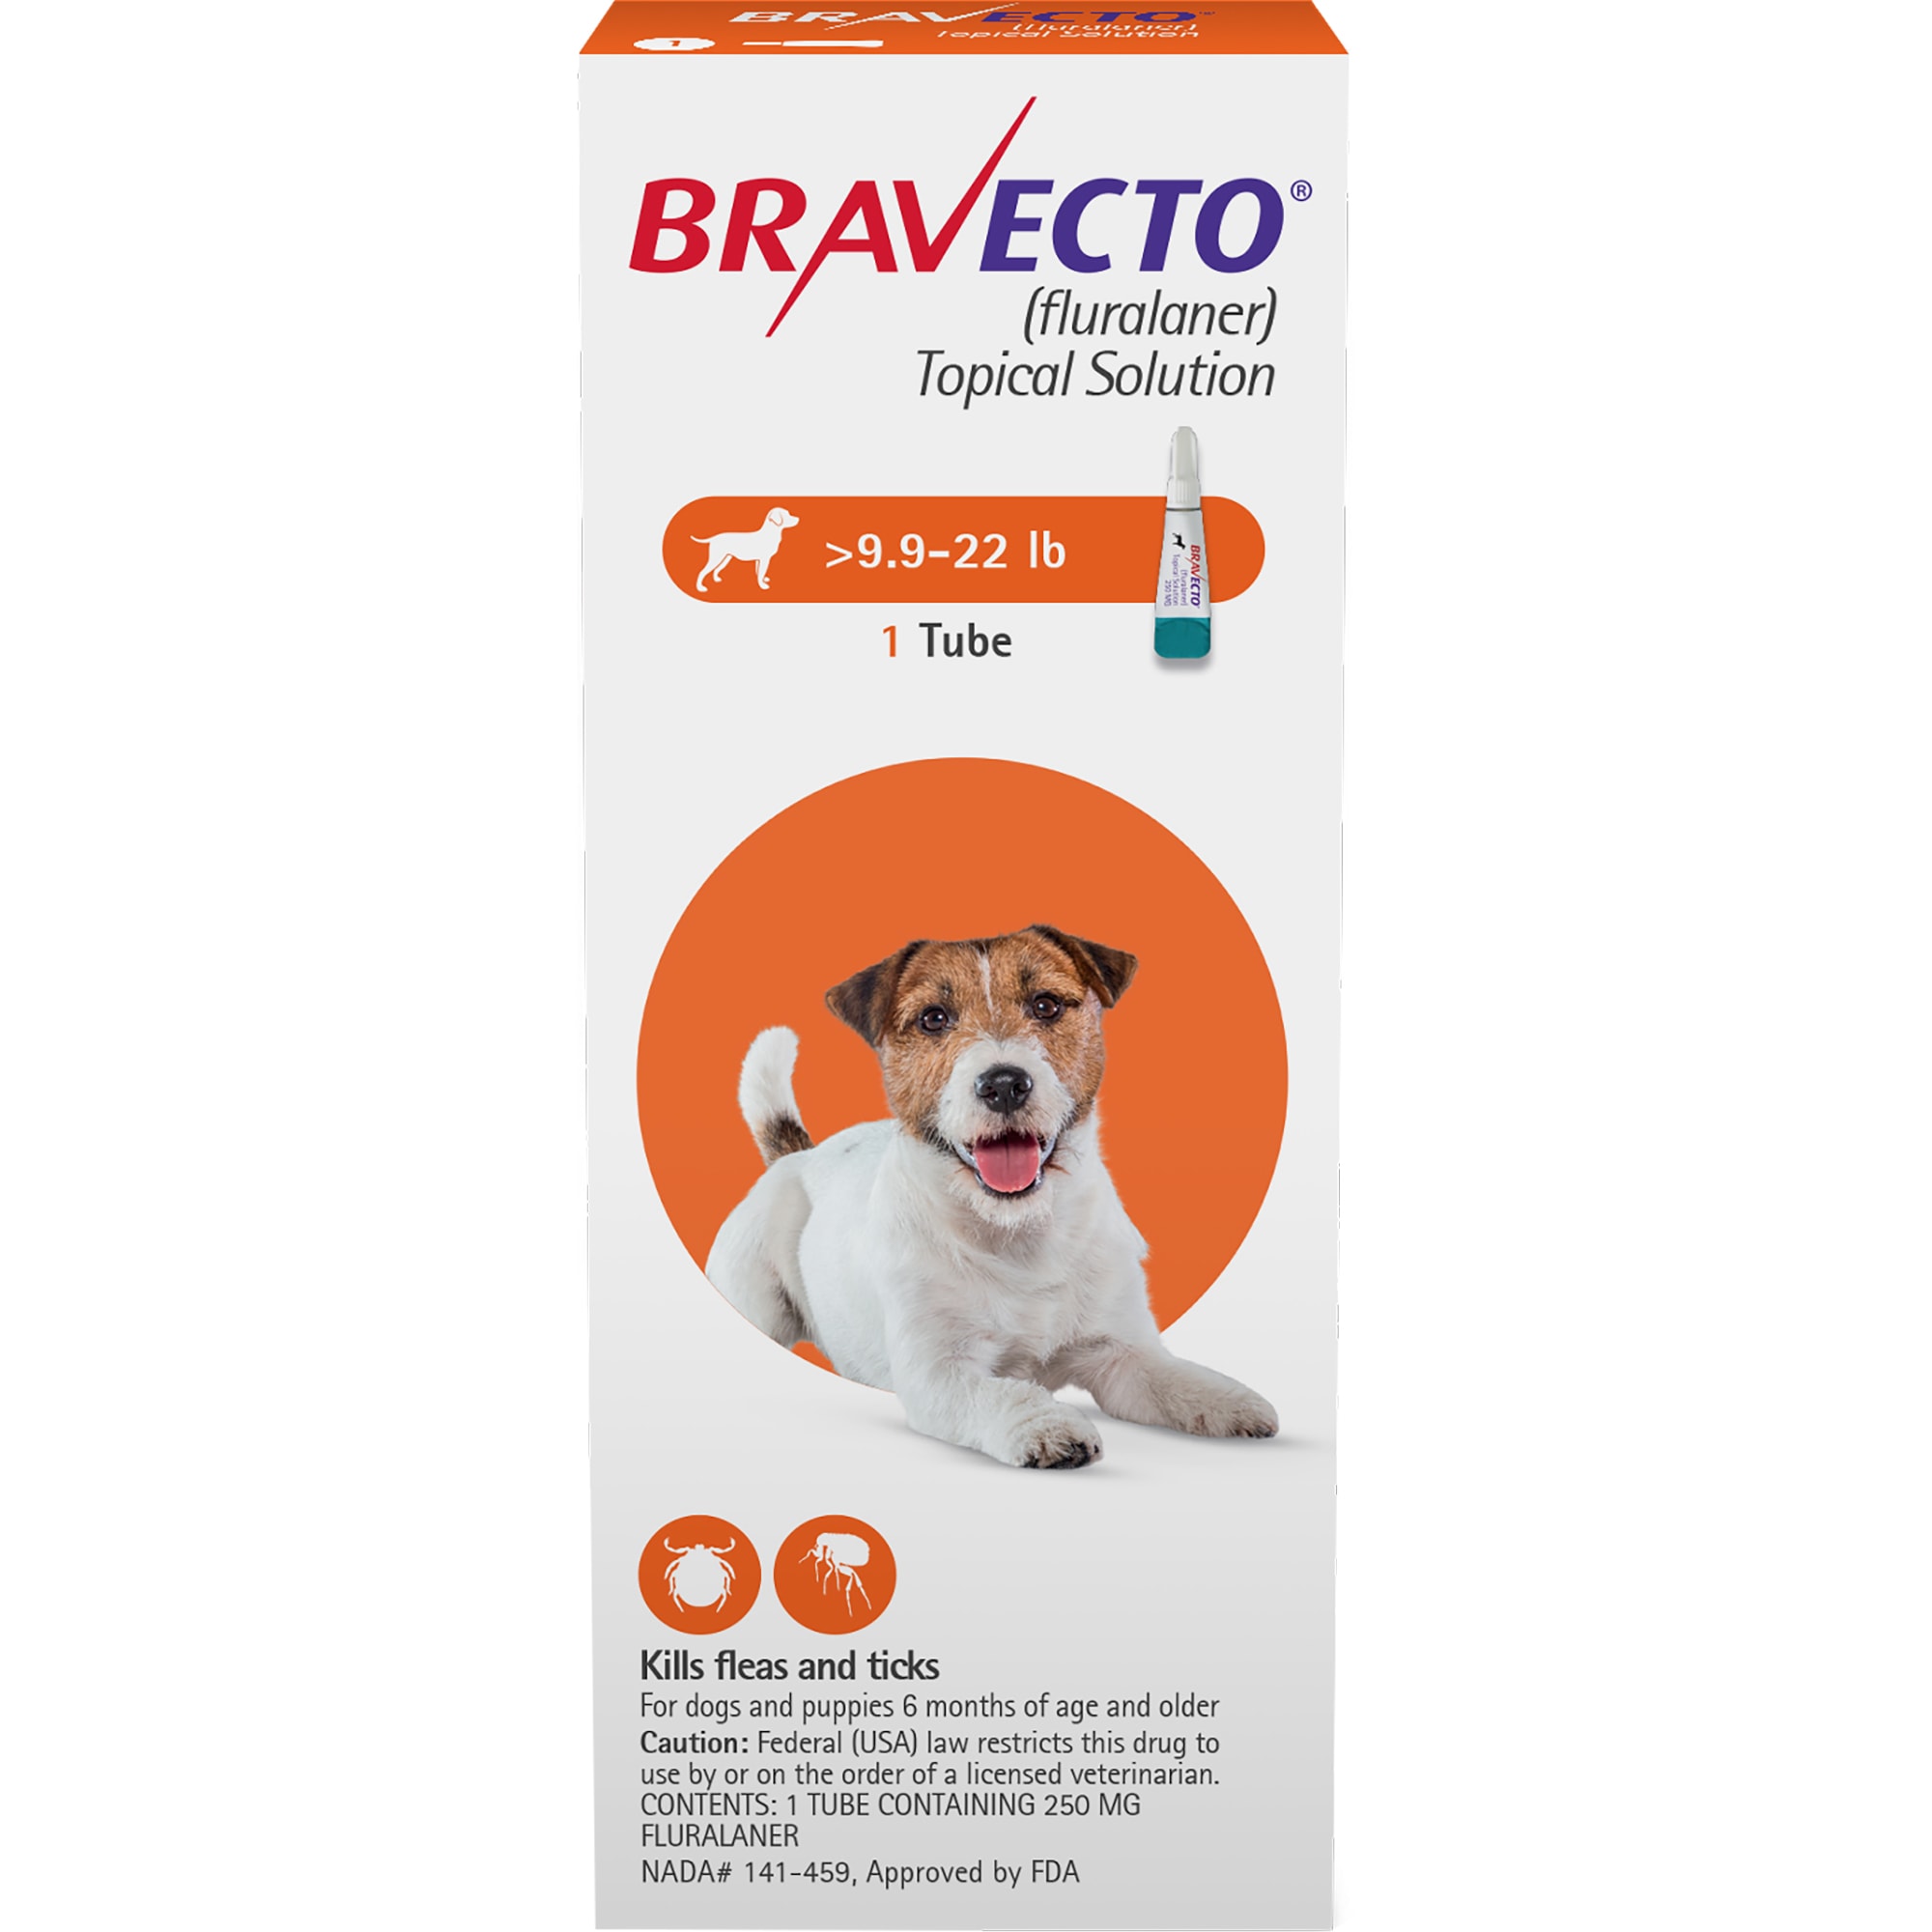 Bravecto SpotOn for Dogs - Fluralaner Topical Solution for Dogs